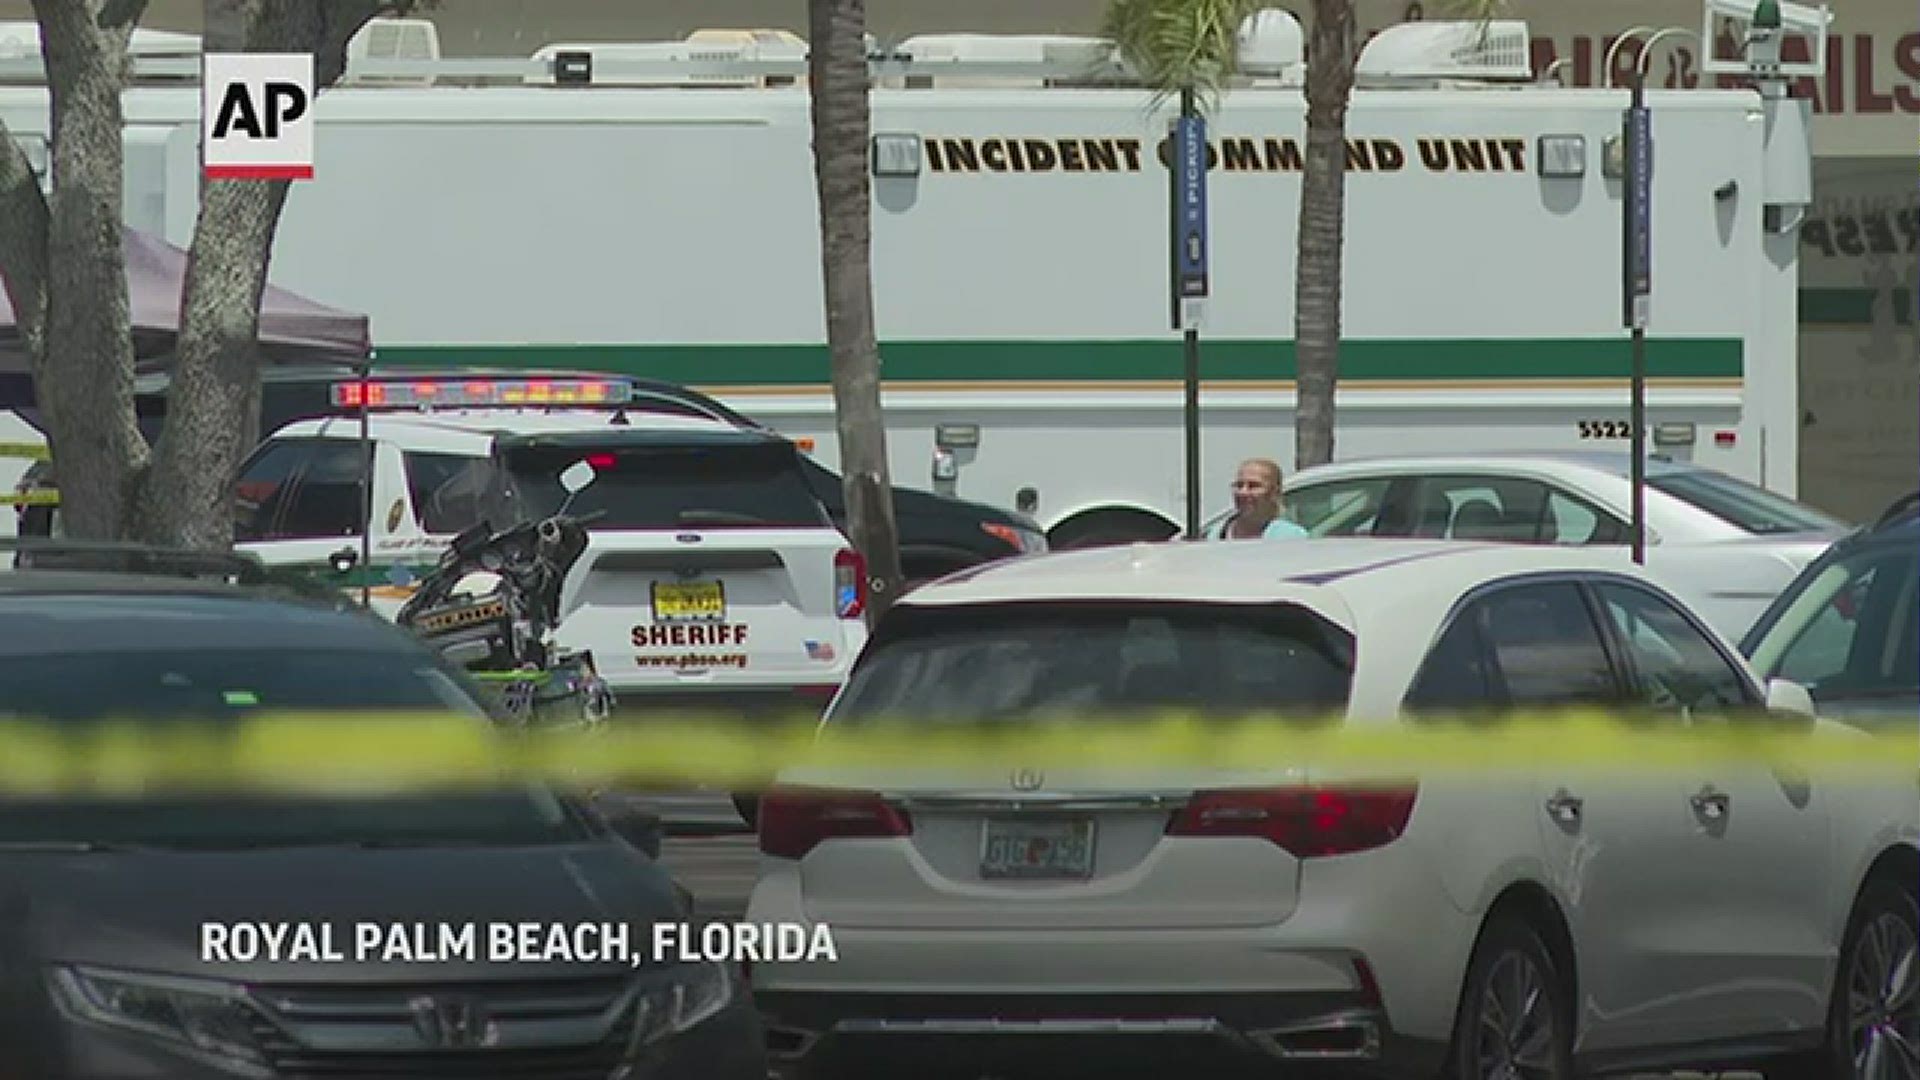 A man fatally shot a woman and a child inside a Florida supermarket Thursday before killing himself, authorities said, causing dozens to flee the store in panic.